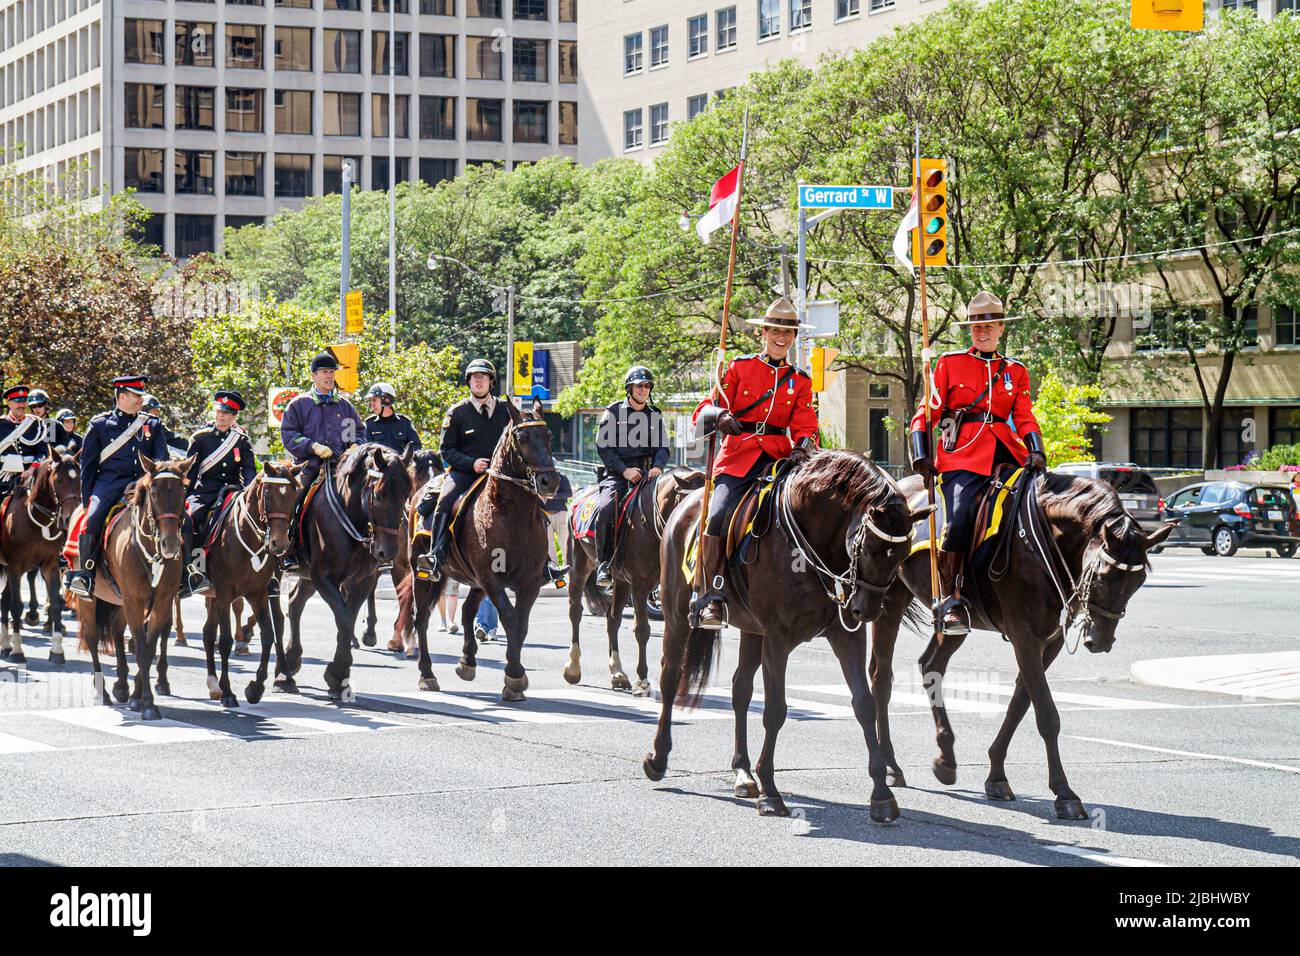 Toronto Canada,University Avenue,Police Equestrian Day,Royal Canadian Mounted Police,Mounties,horses parade drill team officers men male uniforms Stock Photo